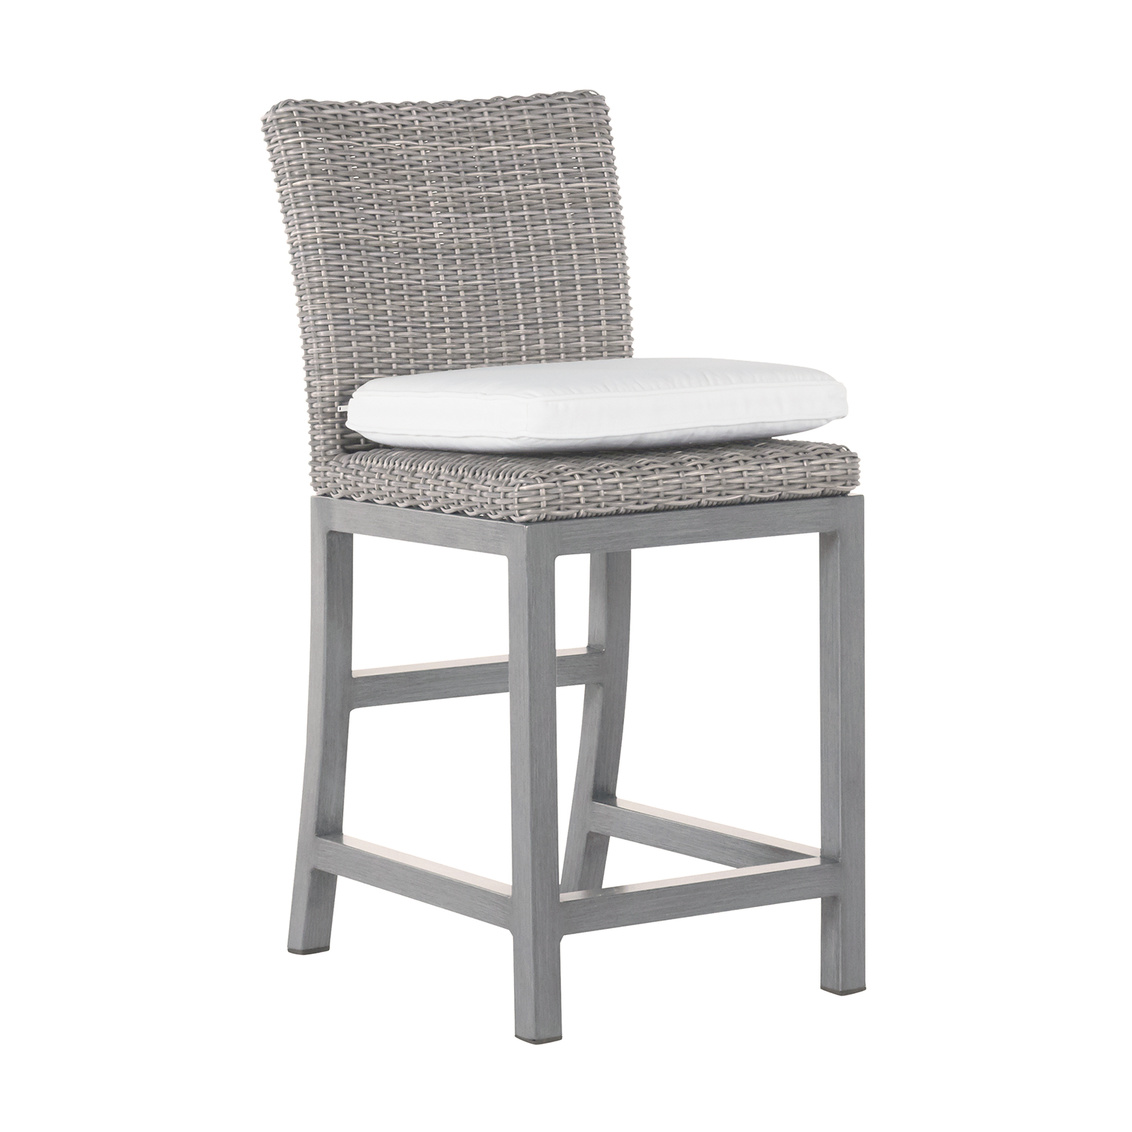 24 inch rustic bar stool in oyster – frame only product image